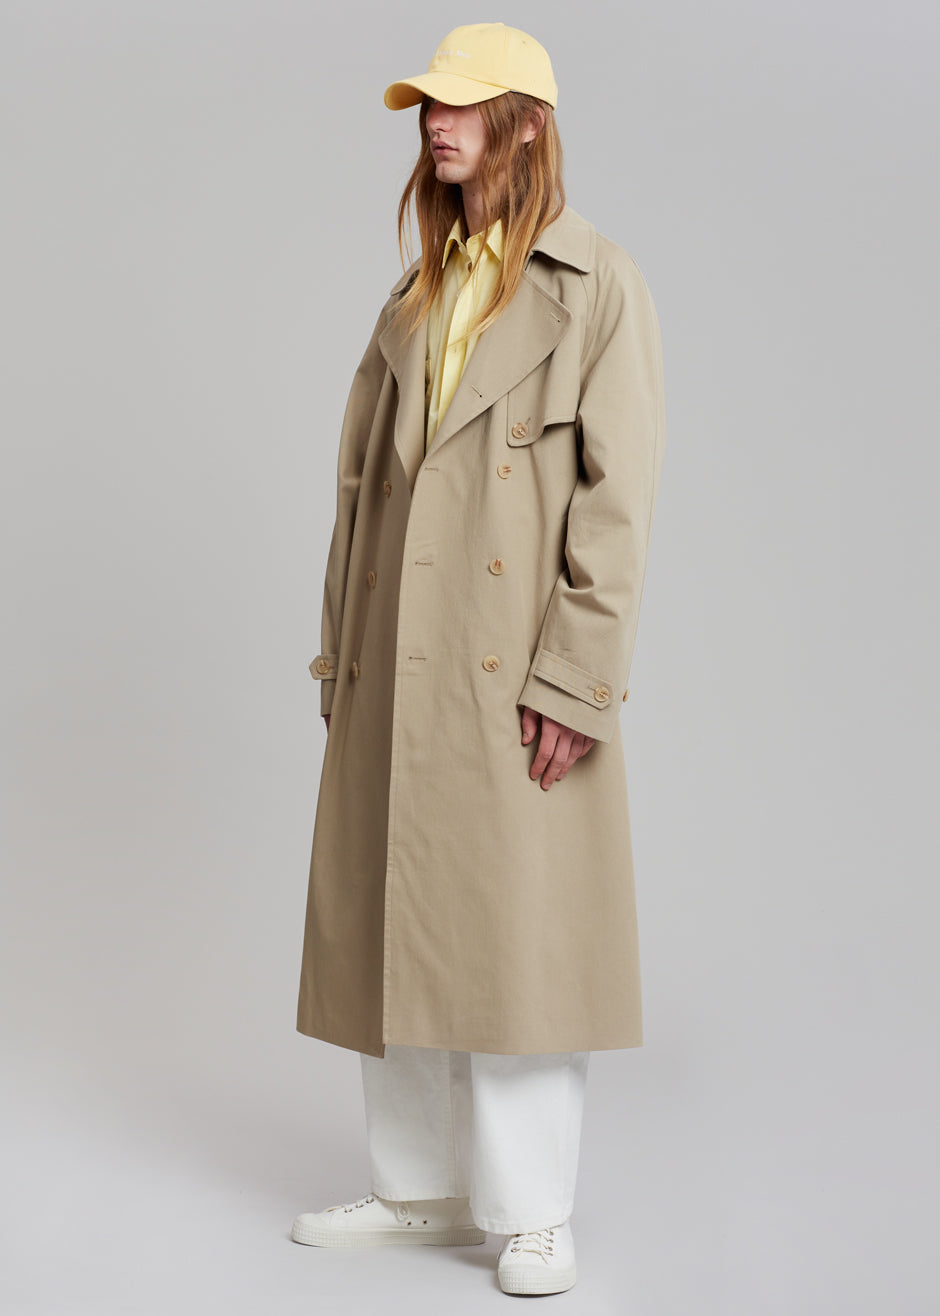 Umi Belted Trench Coat - Beige - 14